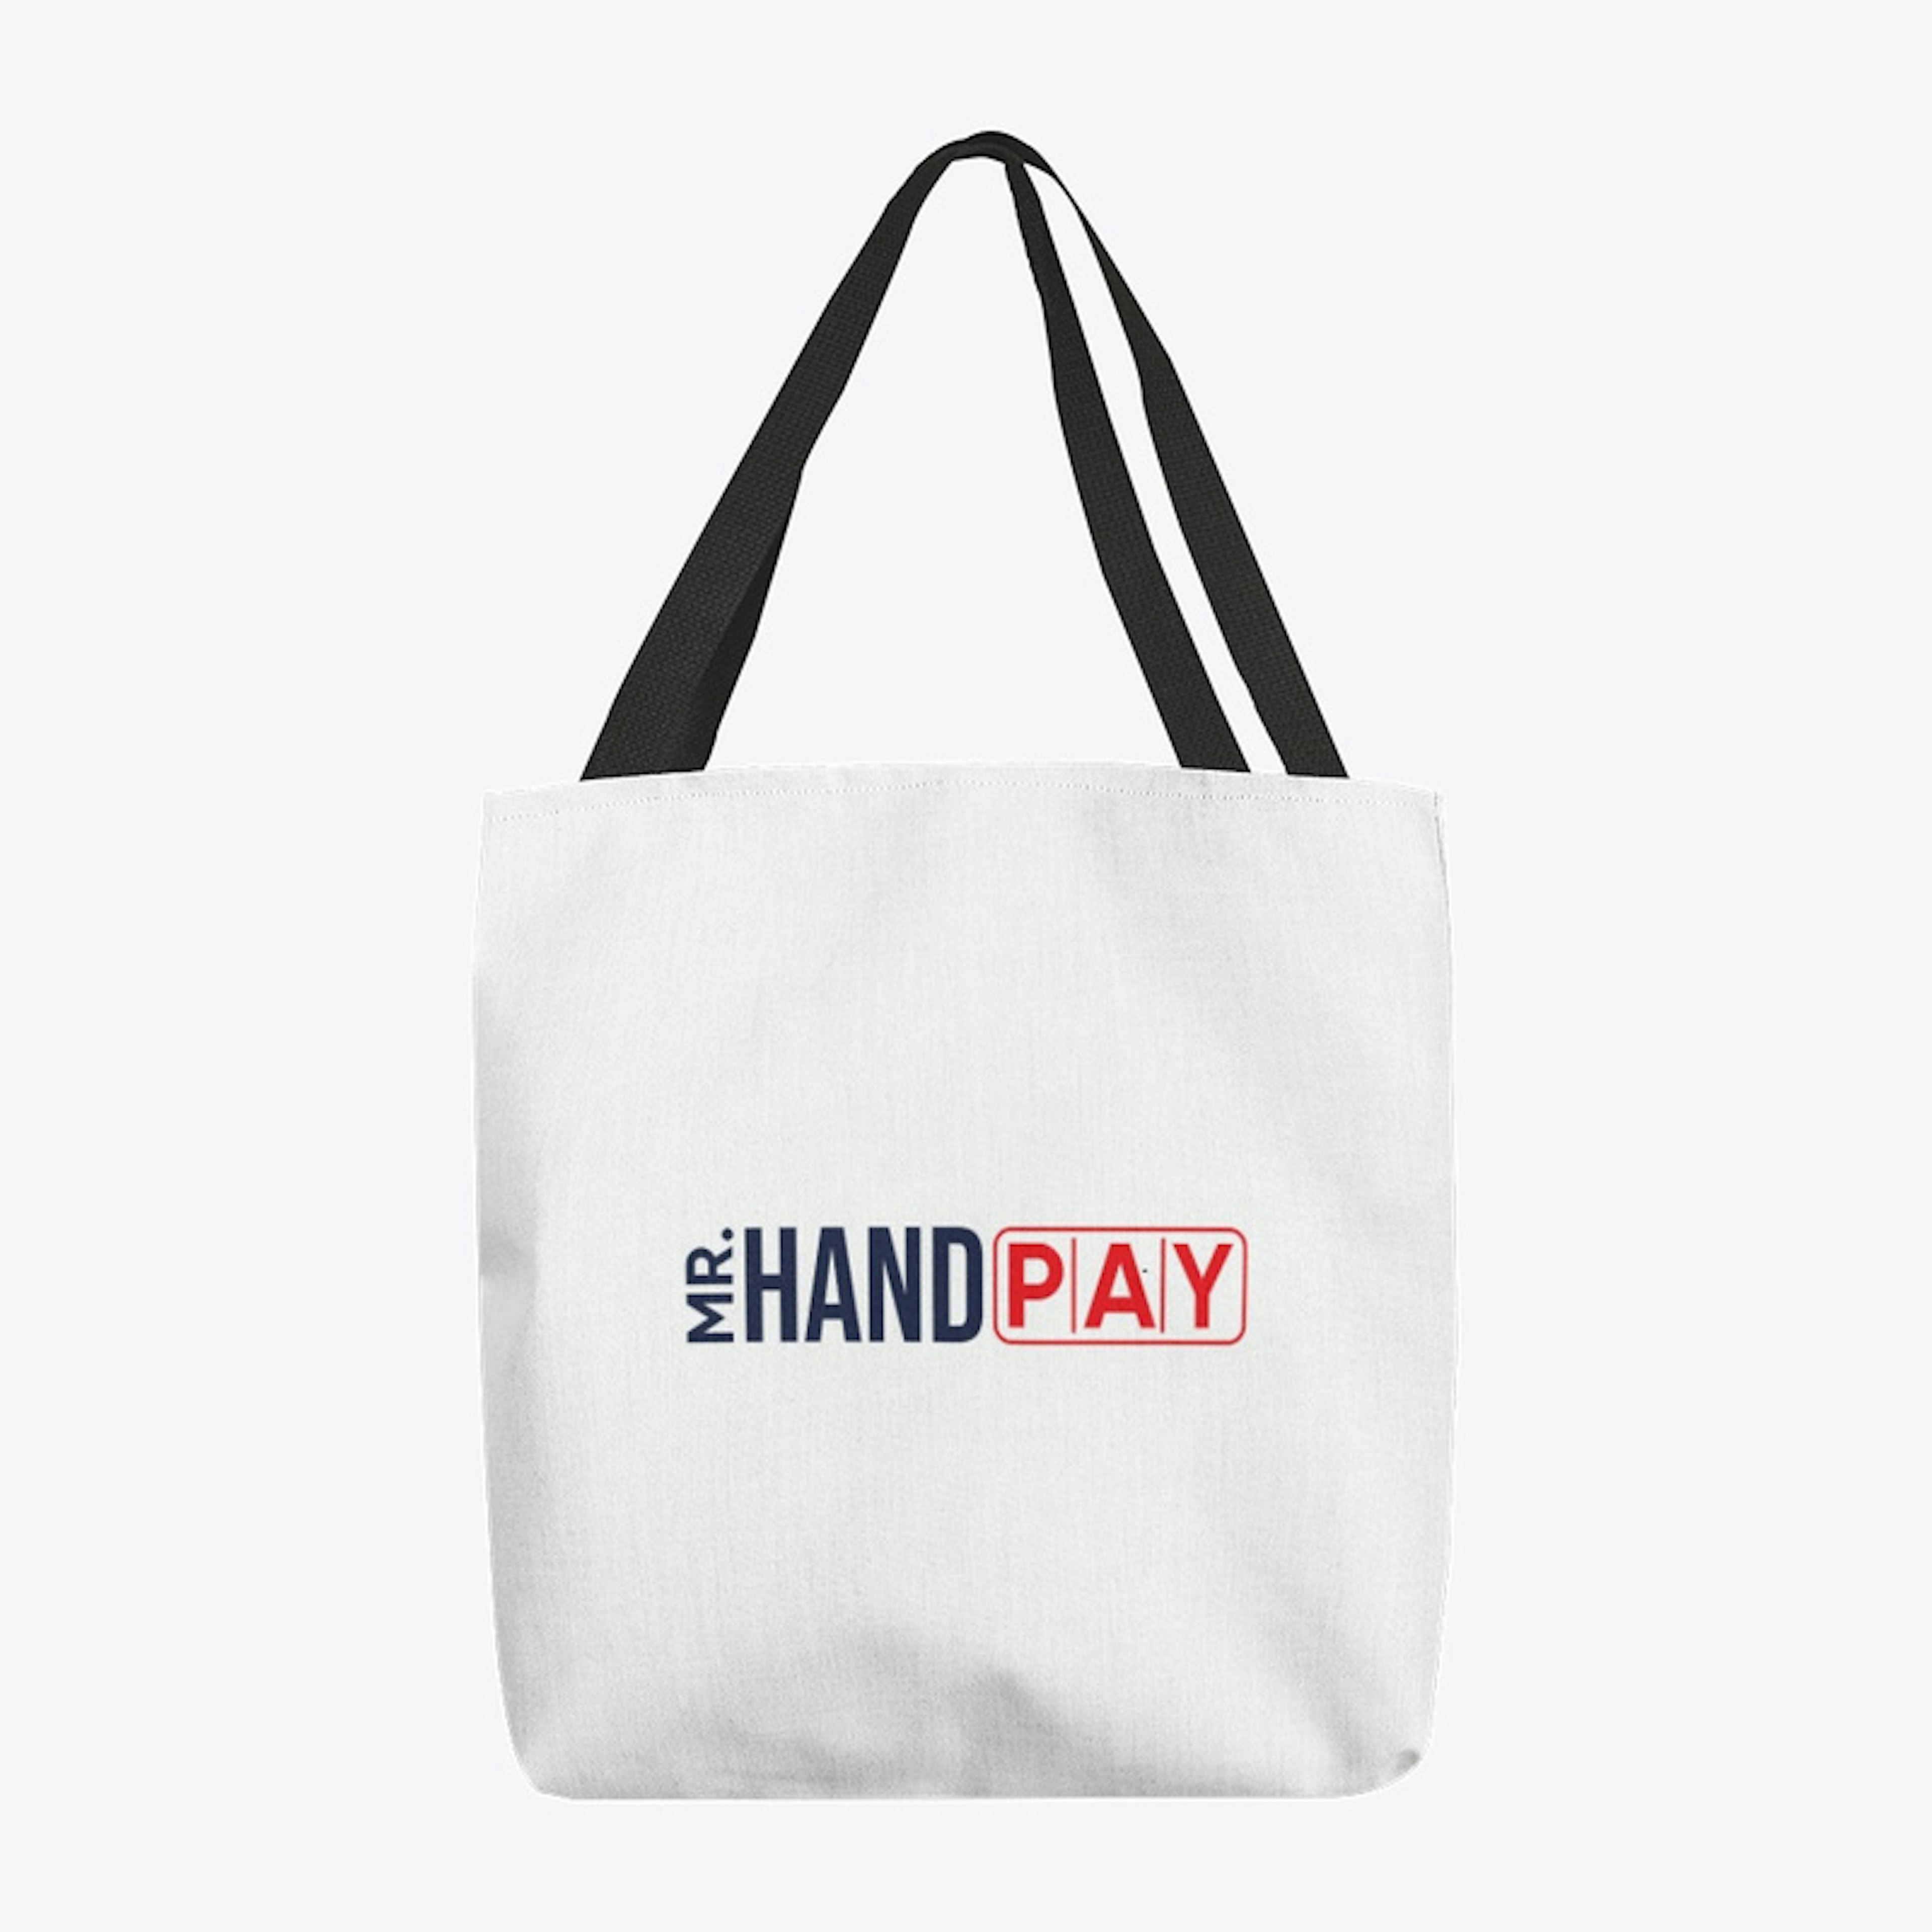 Mr Hand Pay